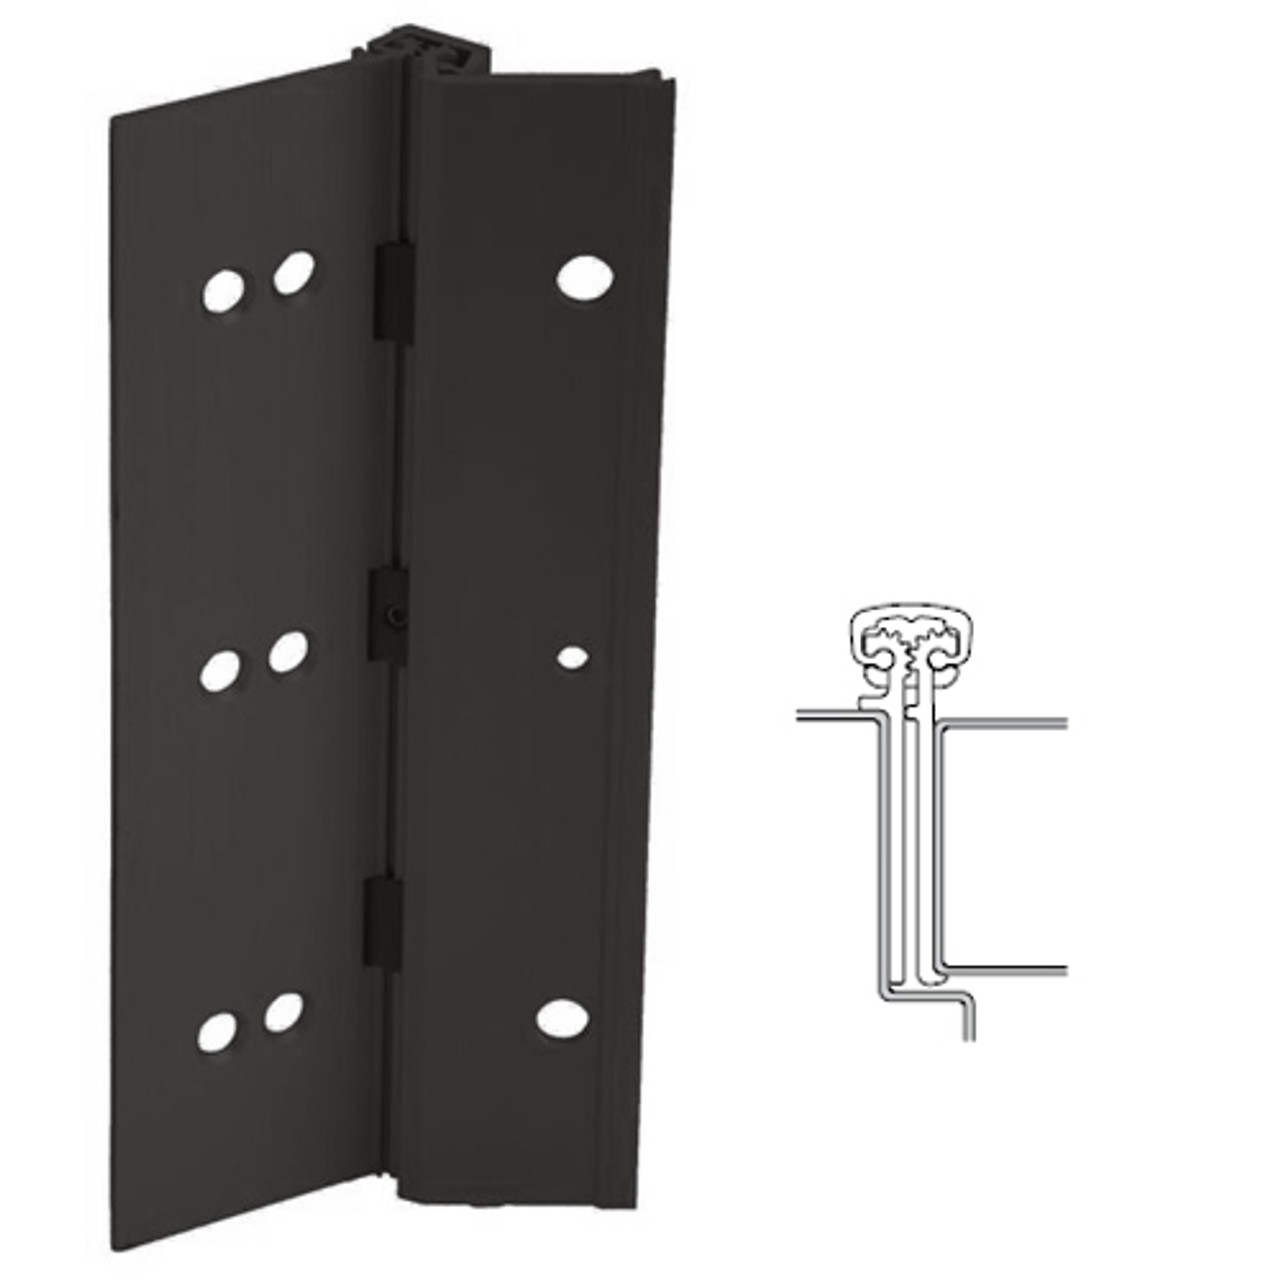 224XY-315AN-85-SECHM IVES Adjustable Full Surface Continuous Geared Hinges with Security Screws - Hex Pin Drive in Anodized Black